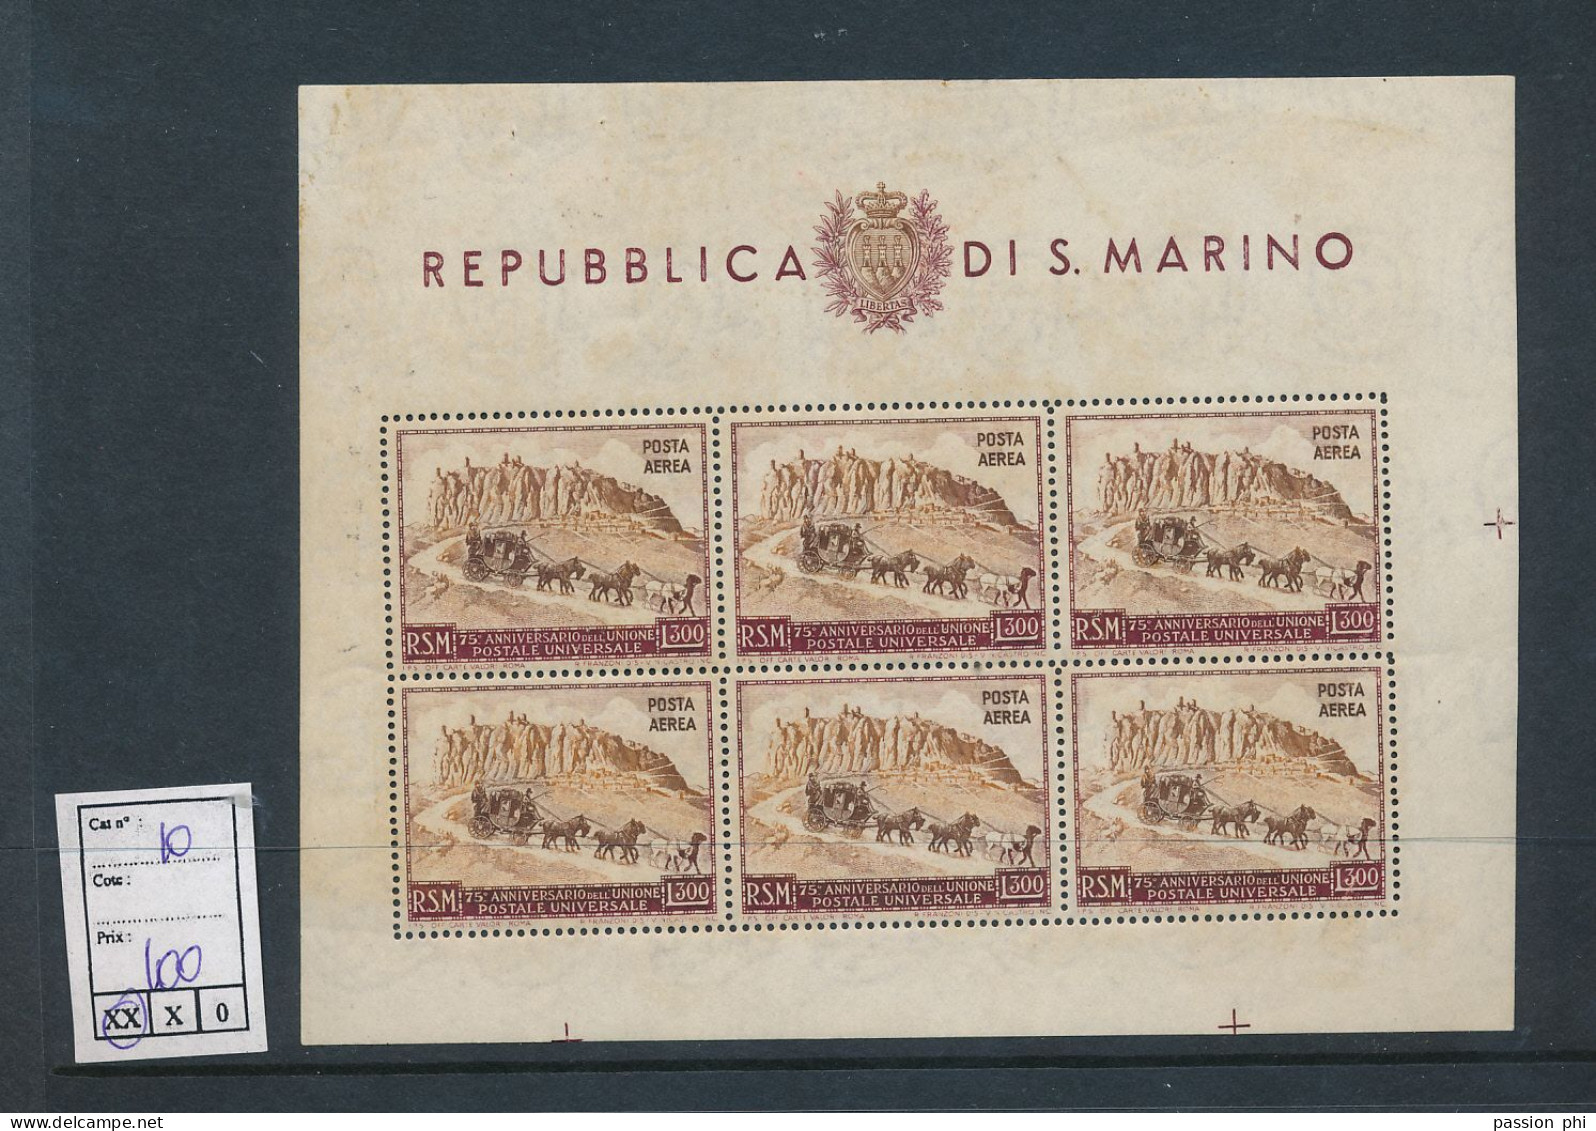 ST. MARINO SASSONE 10 MNH A LACK OF GUM AT THE TOP NORMAL FOR THIS BLOCK TWO PIN HOLES ON THE TOP - Blokken & Velletjes